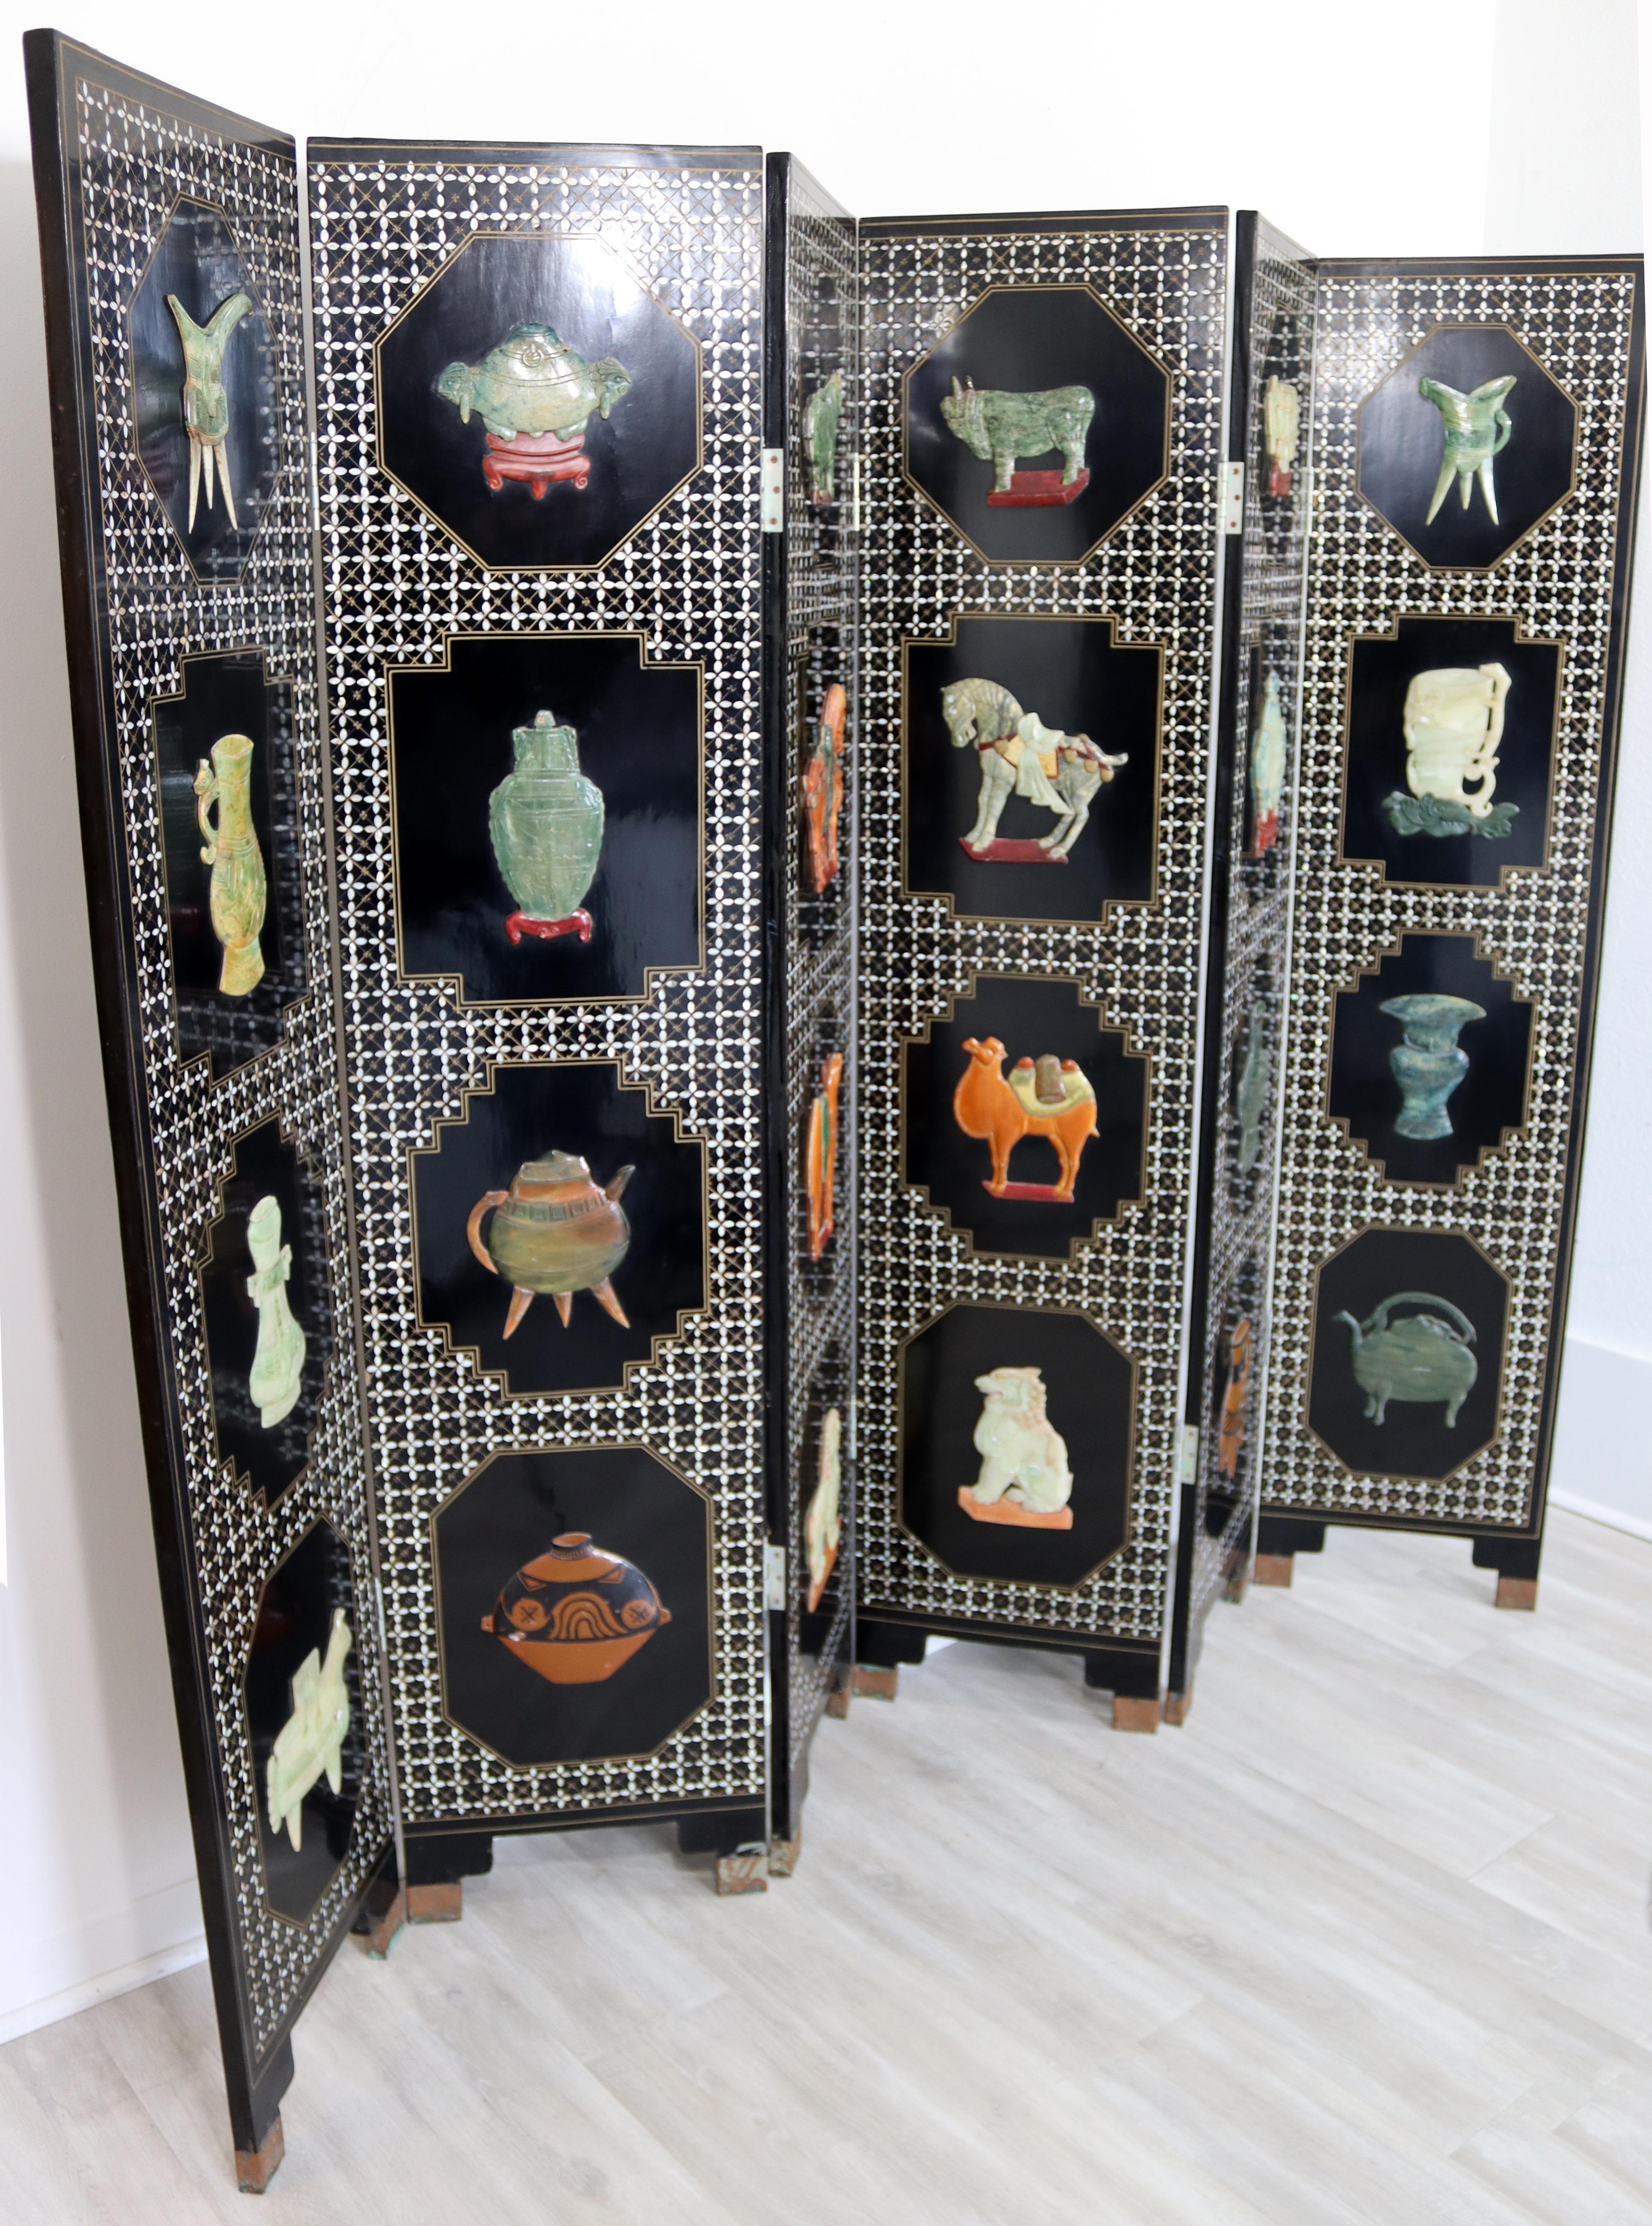 For your consideration is a phenomenal, Asian, six panel, free standing room divider screen featuring jade carved motifs and mother of pearl inlay. In good vintage condition, with some crazing and minor chips were the panels folds. The dimensions